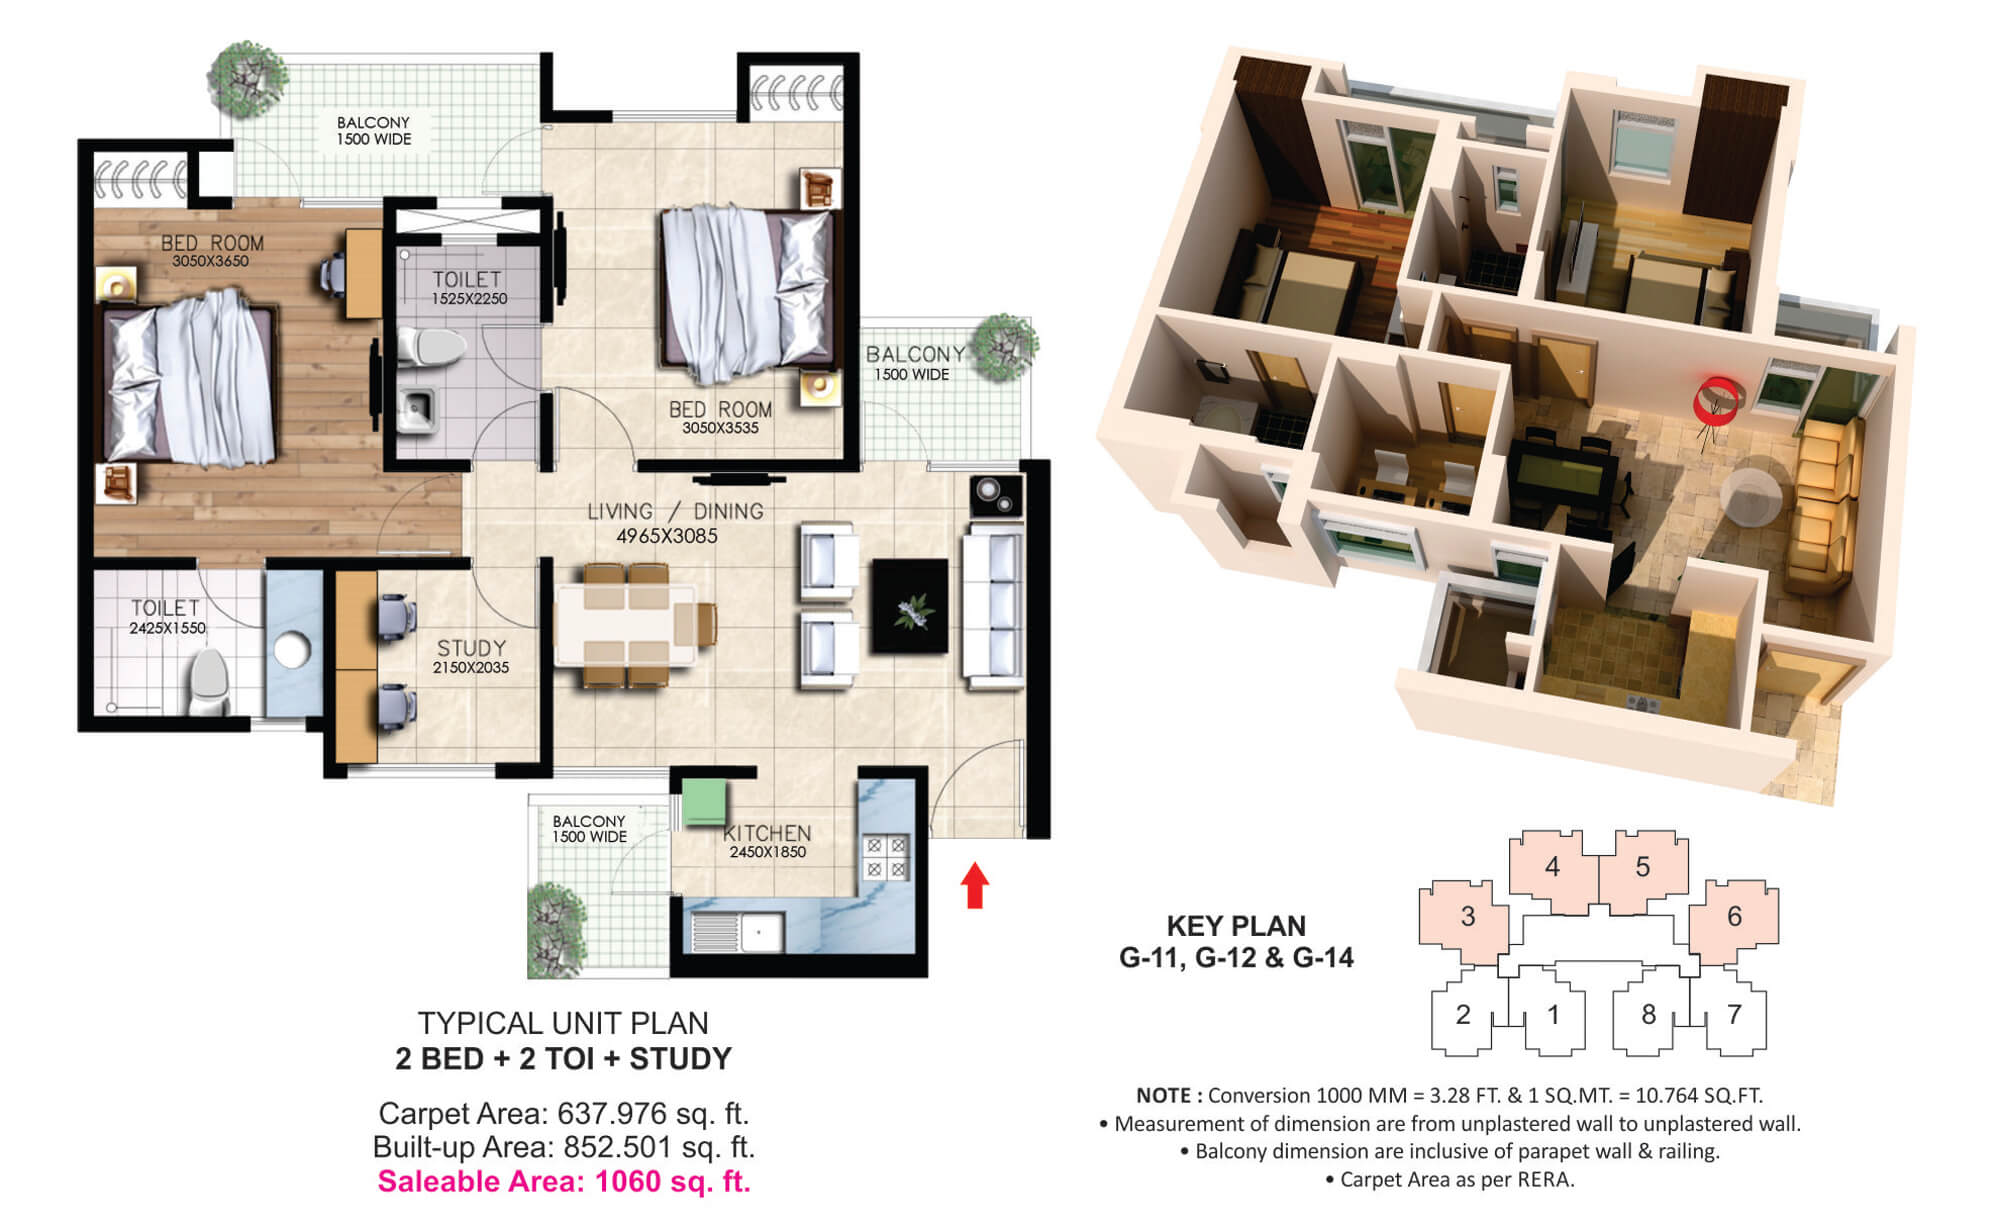 The floor plan size of 2 BHK Flat is 1060 sq ft.